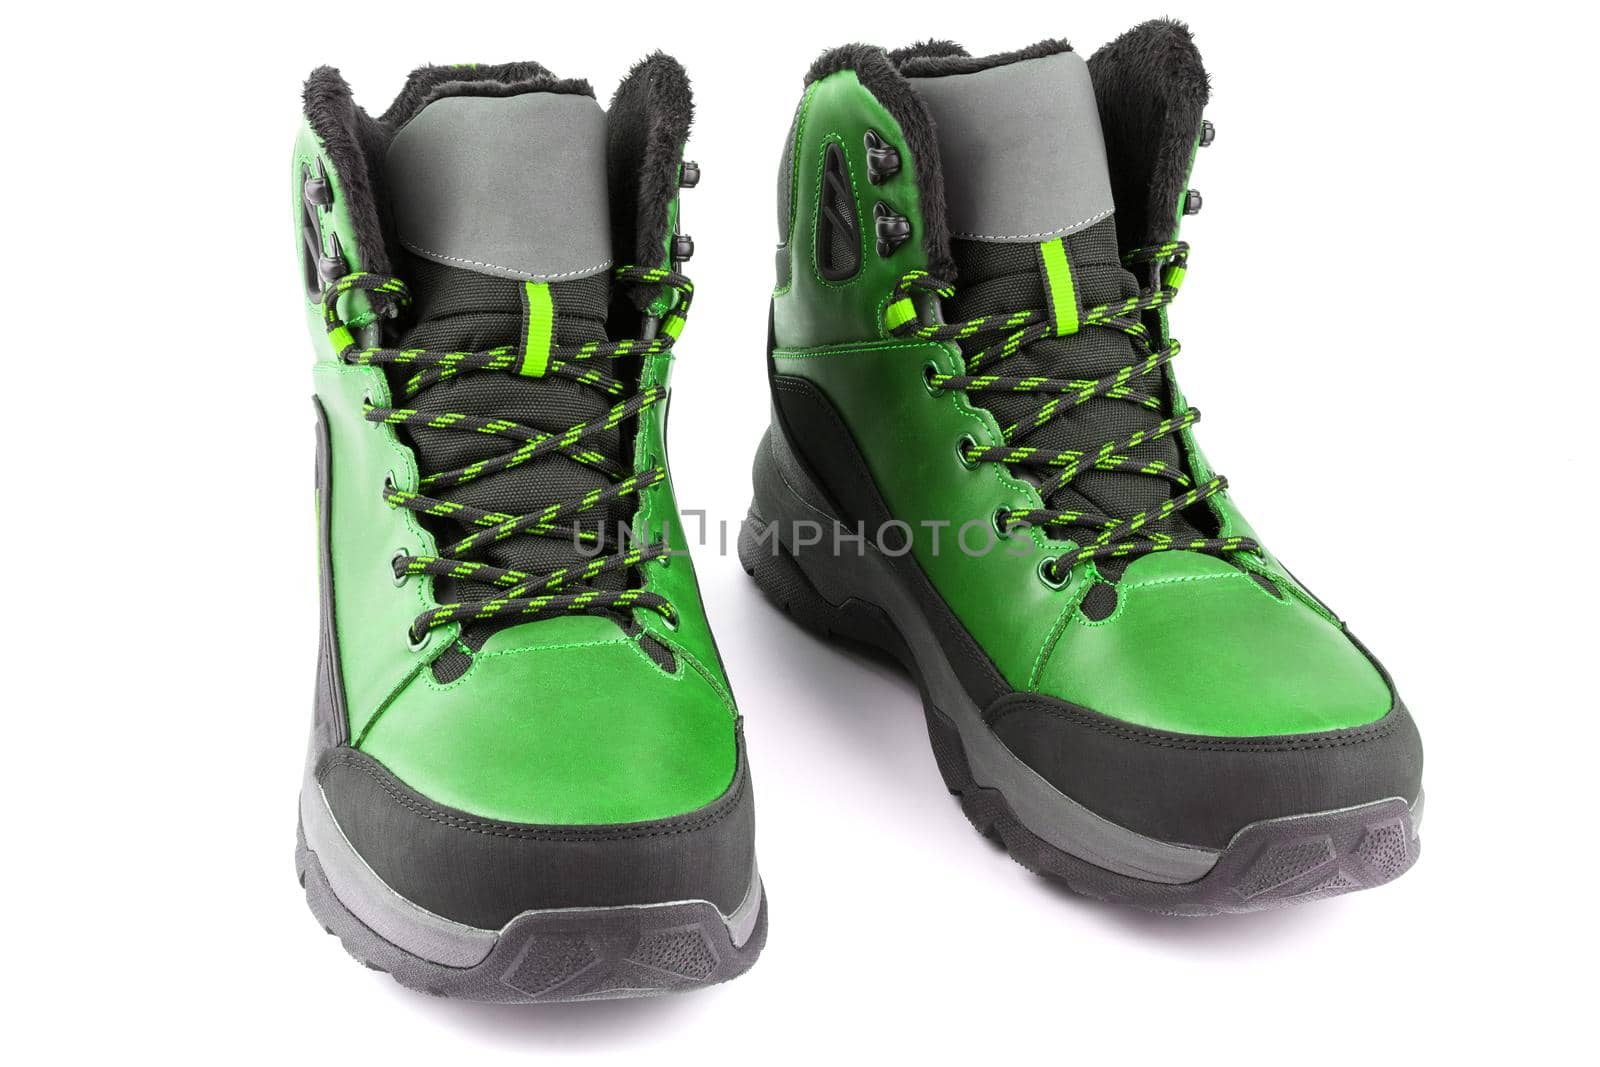 pair of green insulated winter warm three quarter sneaker or boot isolated on white background, perspective view